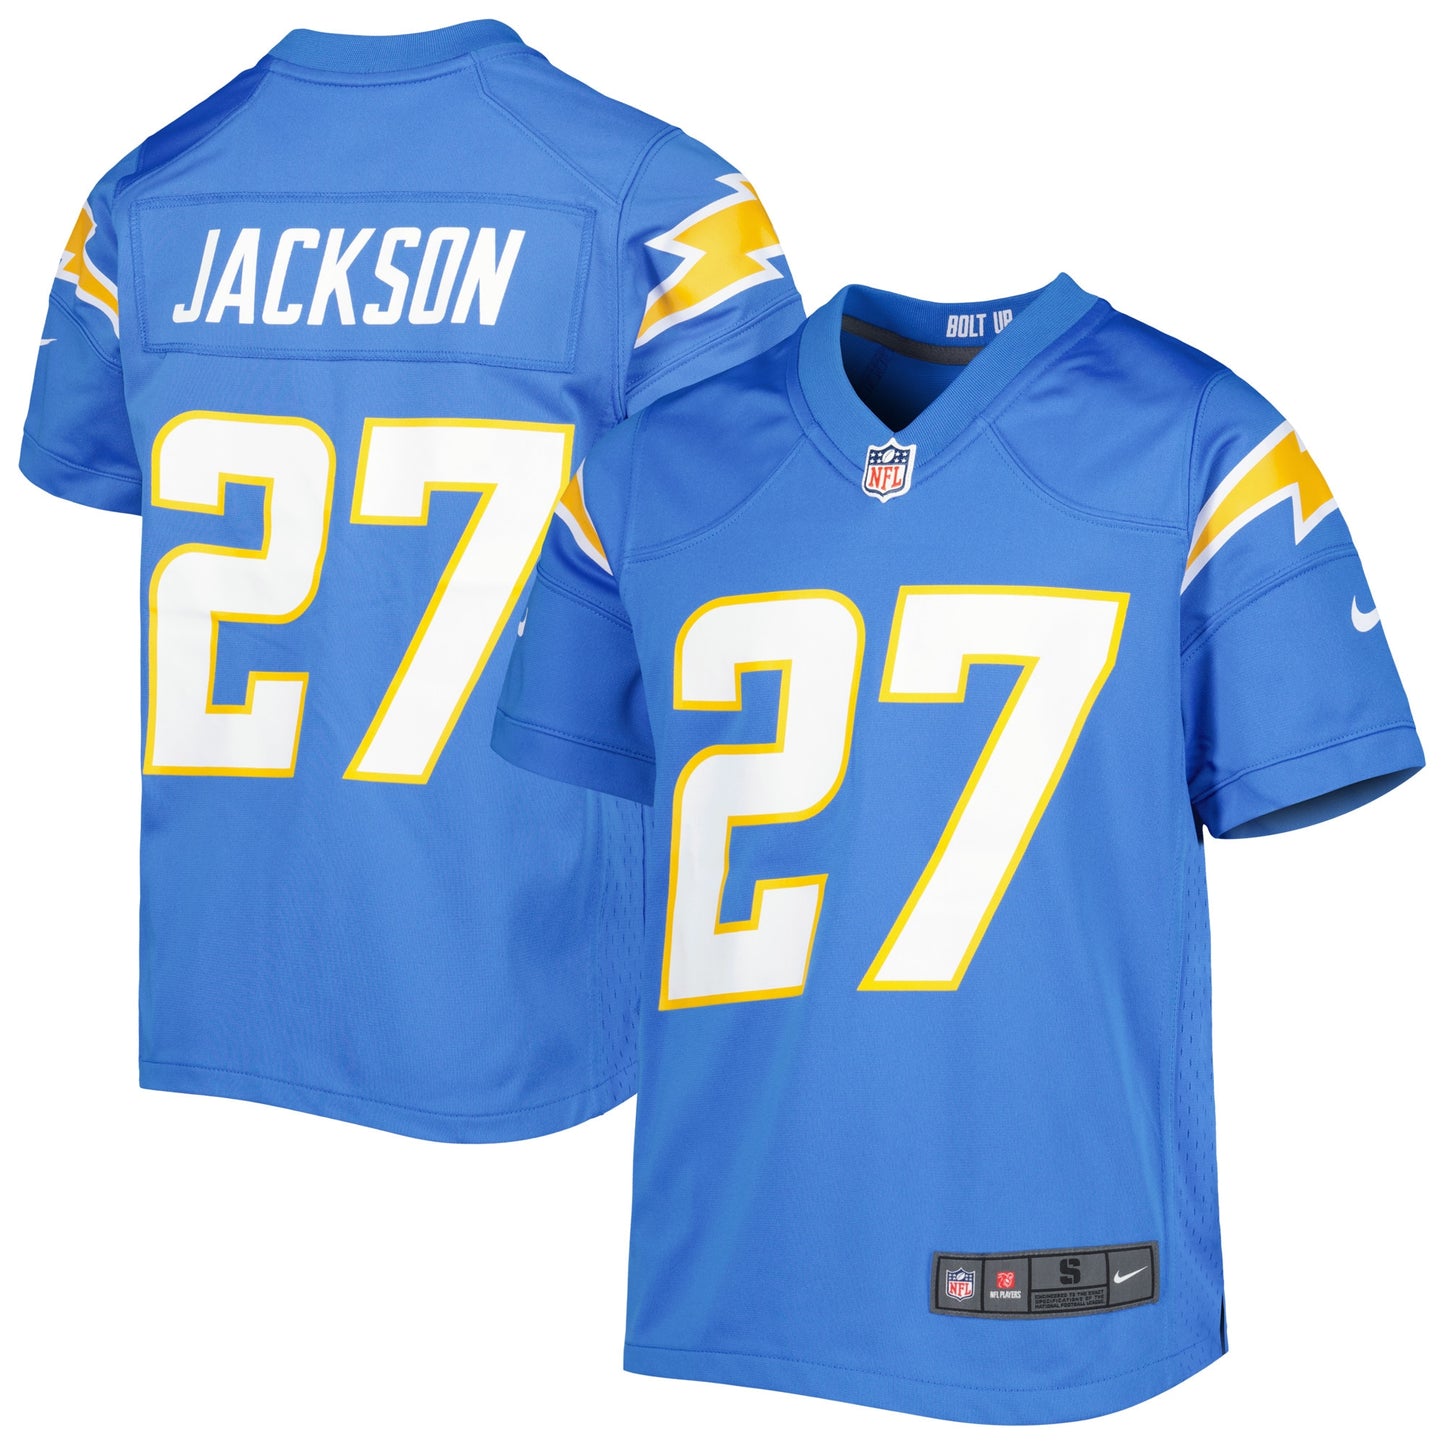 JC Jackson Los Angeles Chargers Nike Youth Game Jersey - Powder Blue